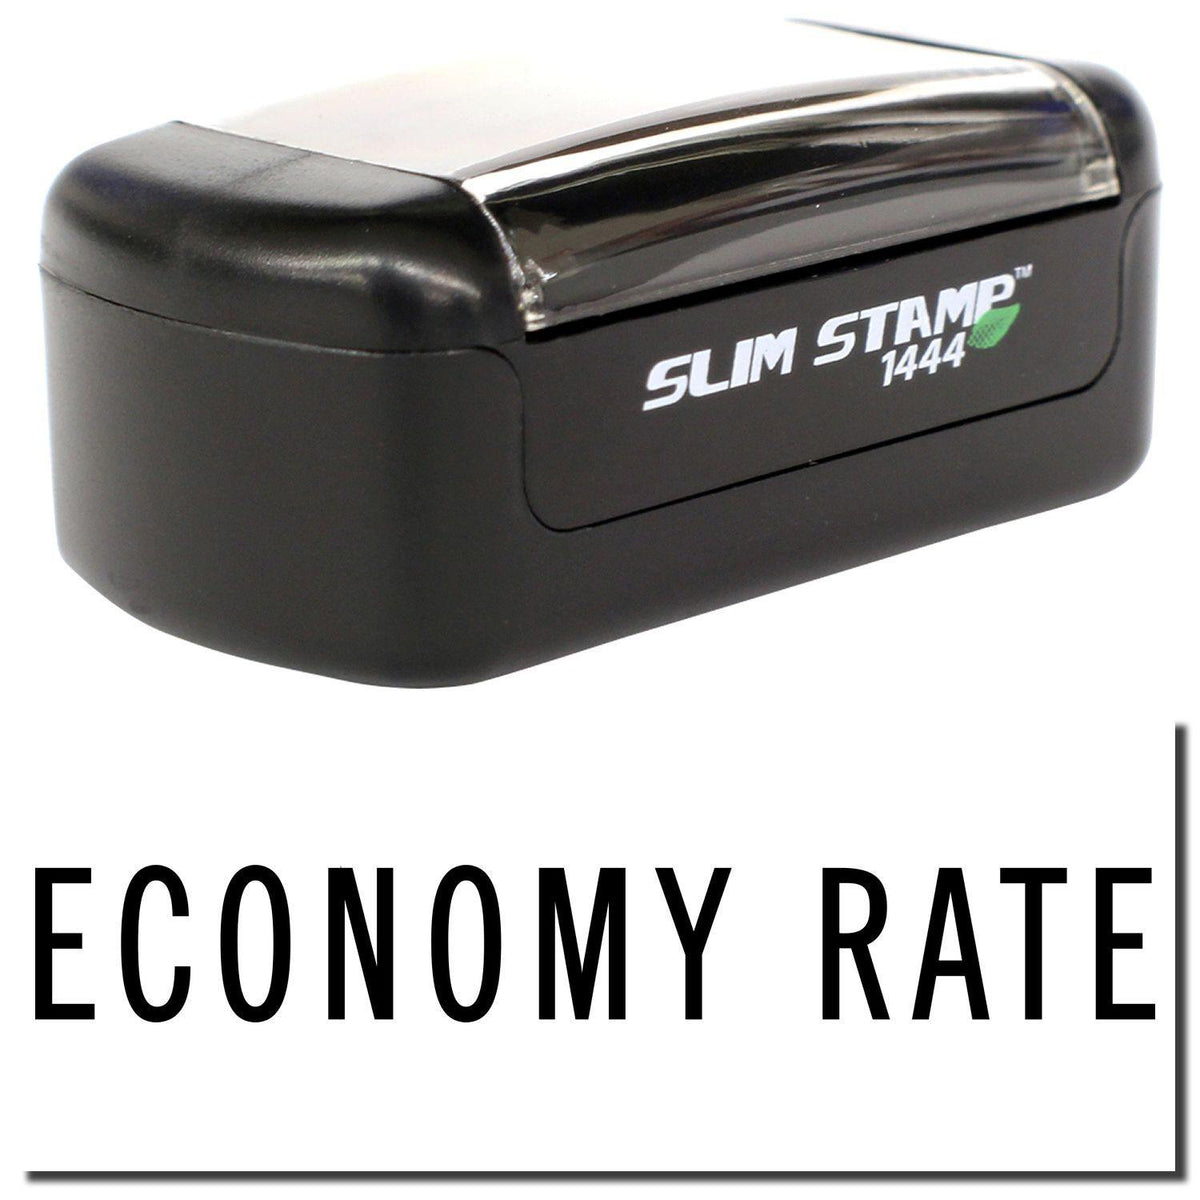 A stock office pre-inked stamp with a stamped image showing how the text &quot;ECONOMY RATE&quot; is displayed after stamping.